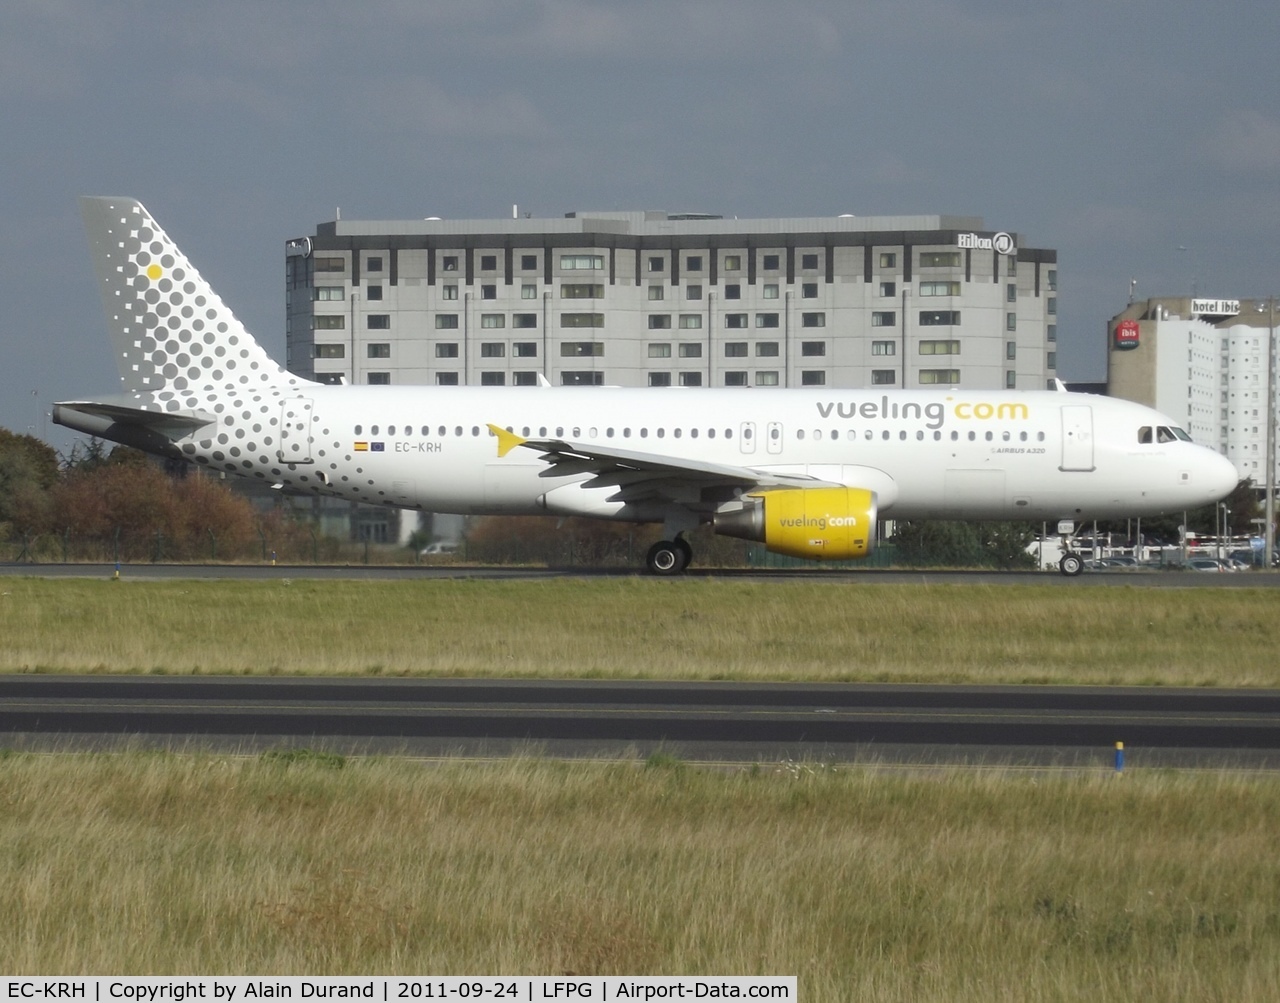 EC-KRH, 2008 Airbus A320-214 C/N 3529, named Vueling Me Softly, Y180, when delivered in 2008, Romeo-Hotel was leased by ILFC which sold the aircraft to Macquarie Air Finance in 2010.